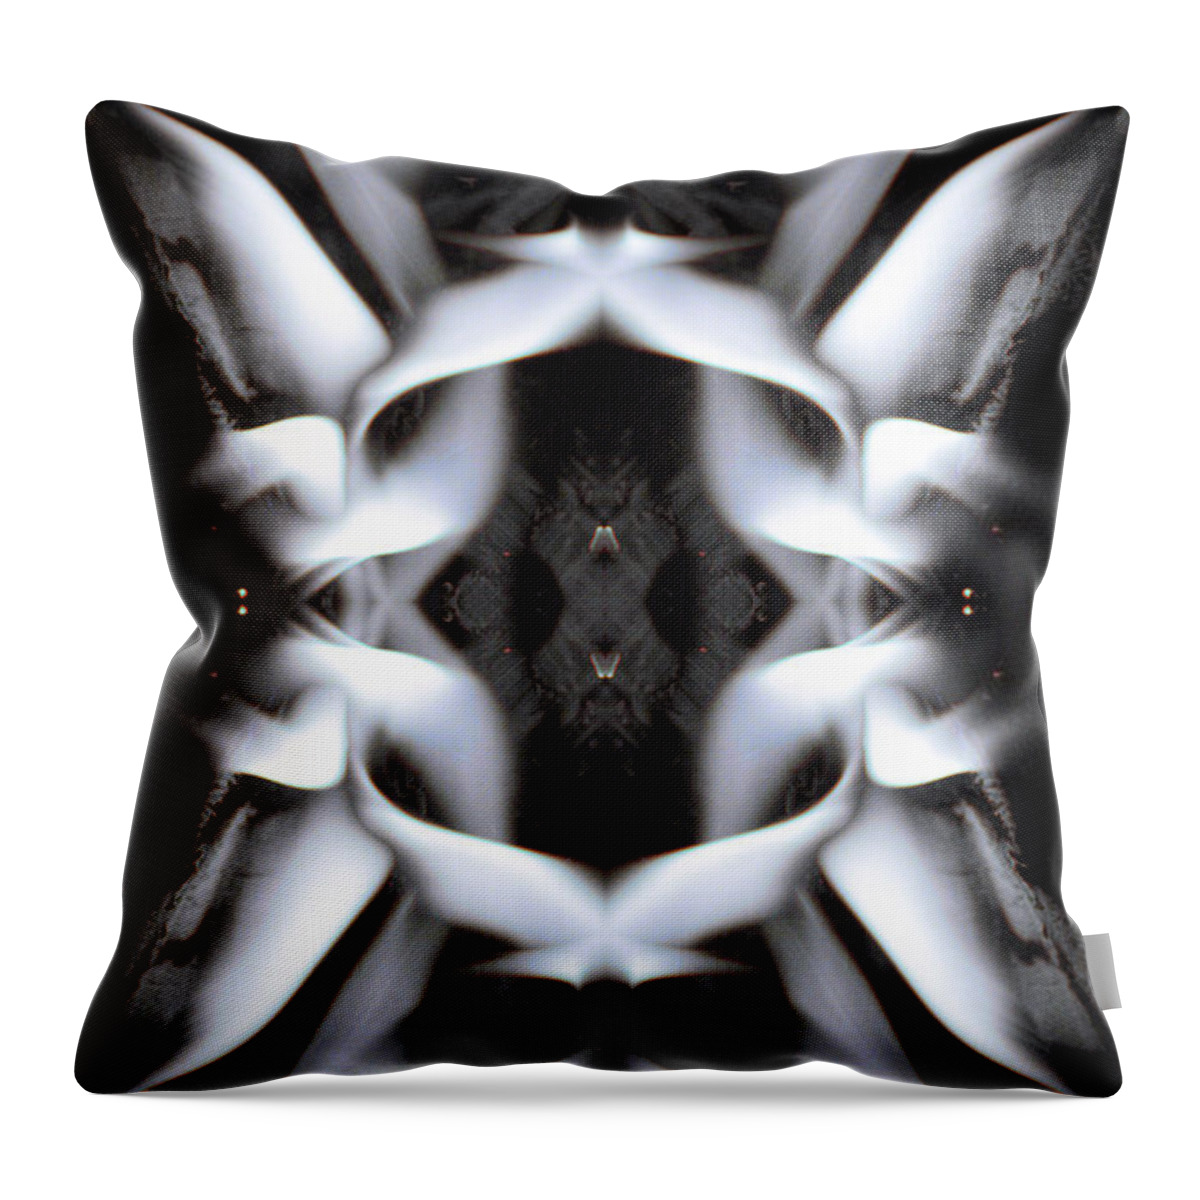 Image Tags Throw Pillow featuring the digital art Fierce Flake 2795 by Alex W McDonell